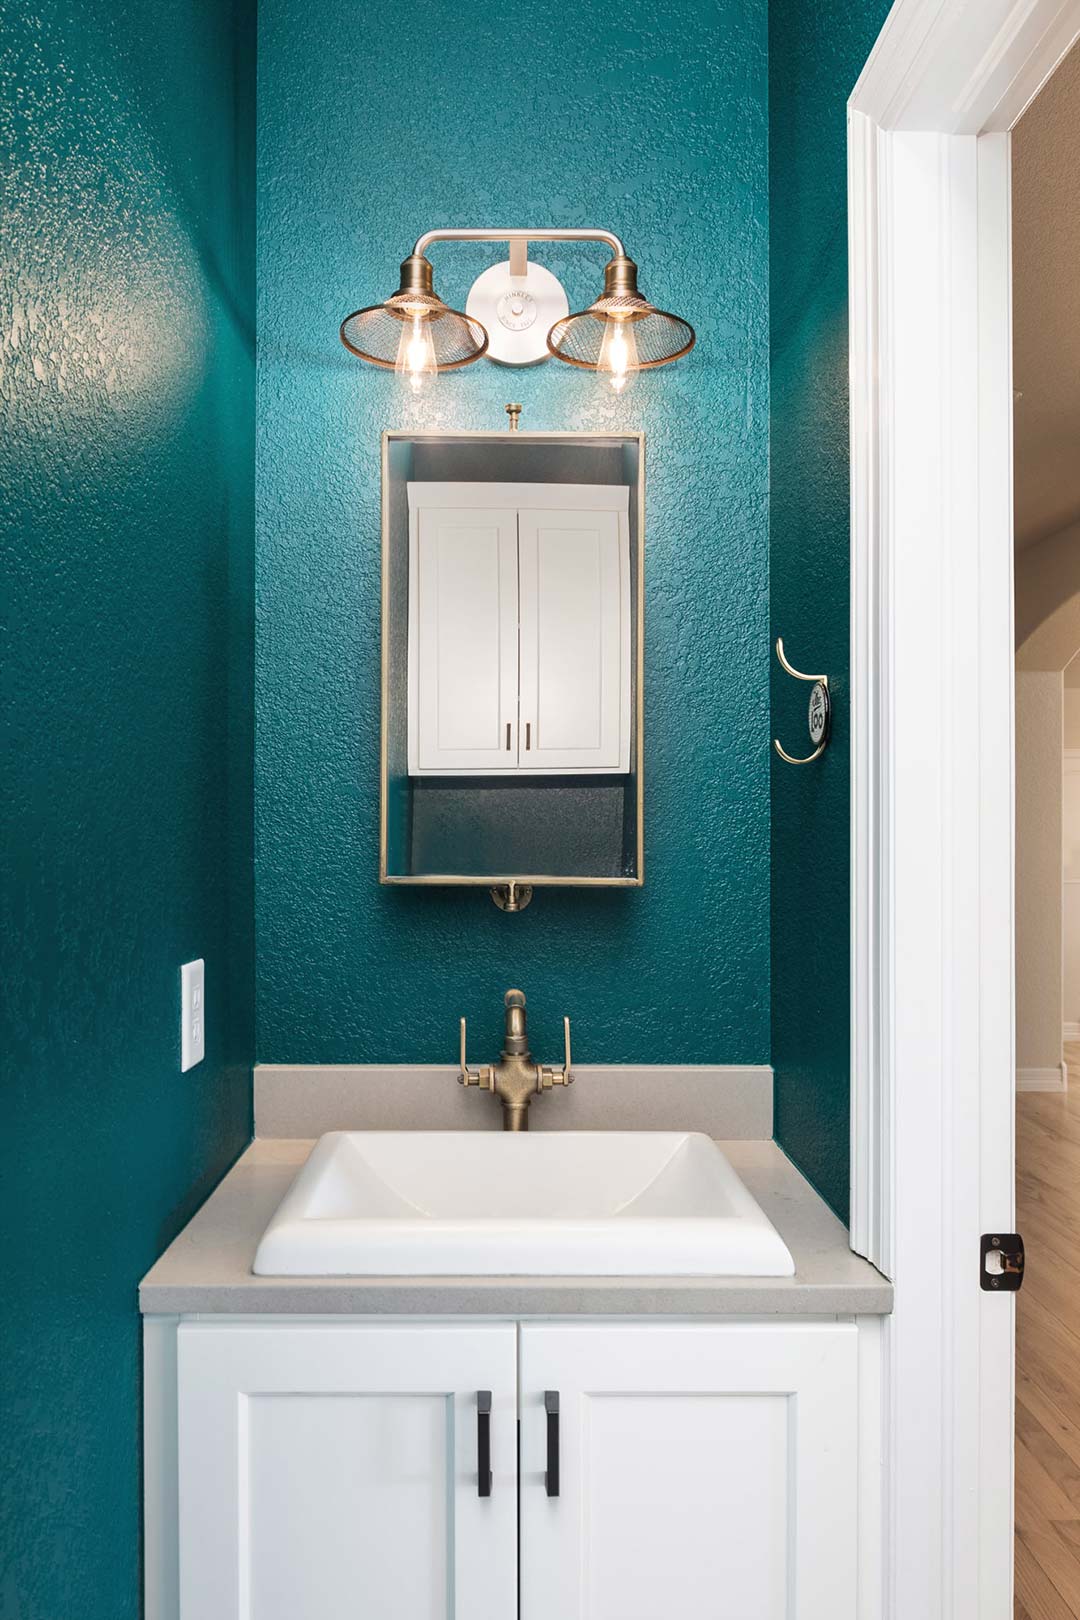 Hallway powder bath view showing the vibrant teal blue wall paint to match the kitchen cabinets nearby